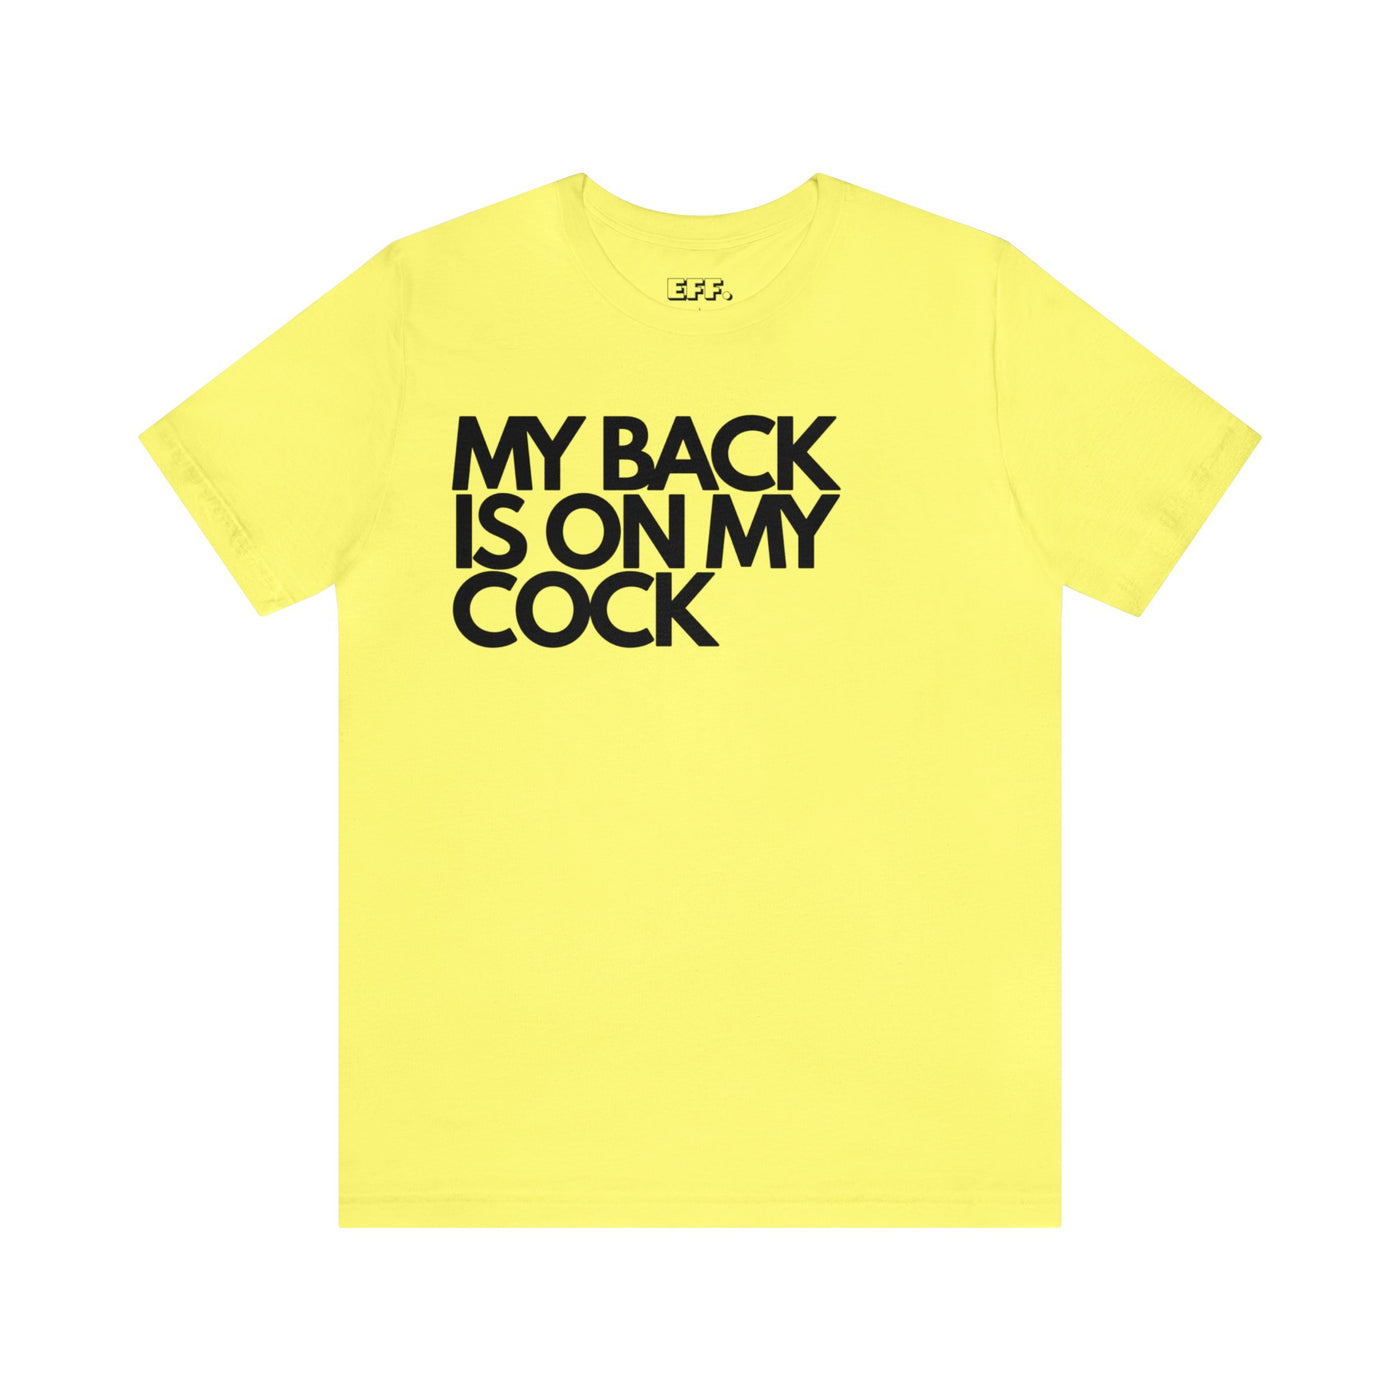 My Back Is On My Cock